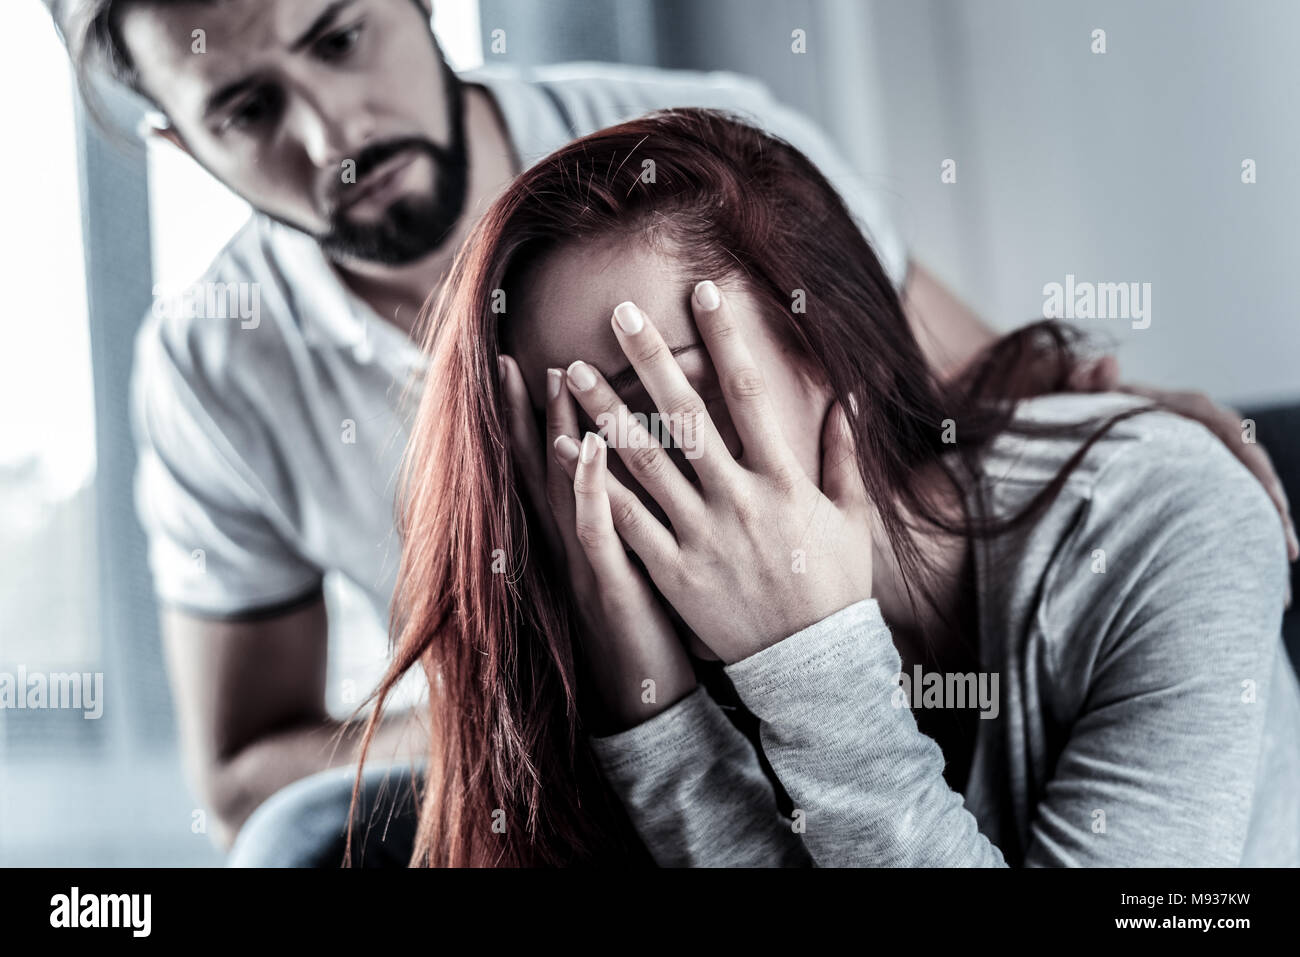 Frustrated upset woman sitting and hiding face behind hands. Stock Photo